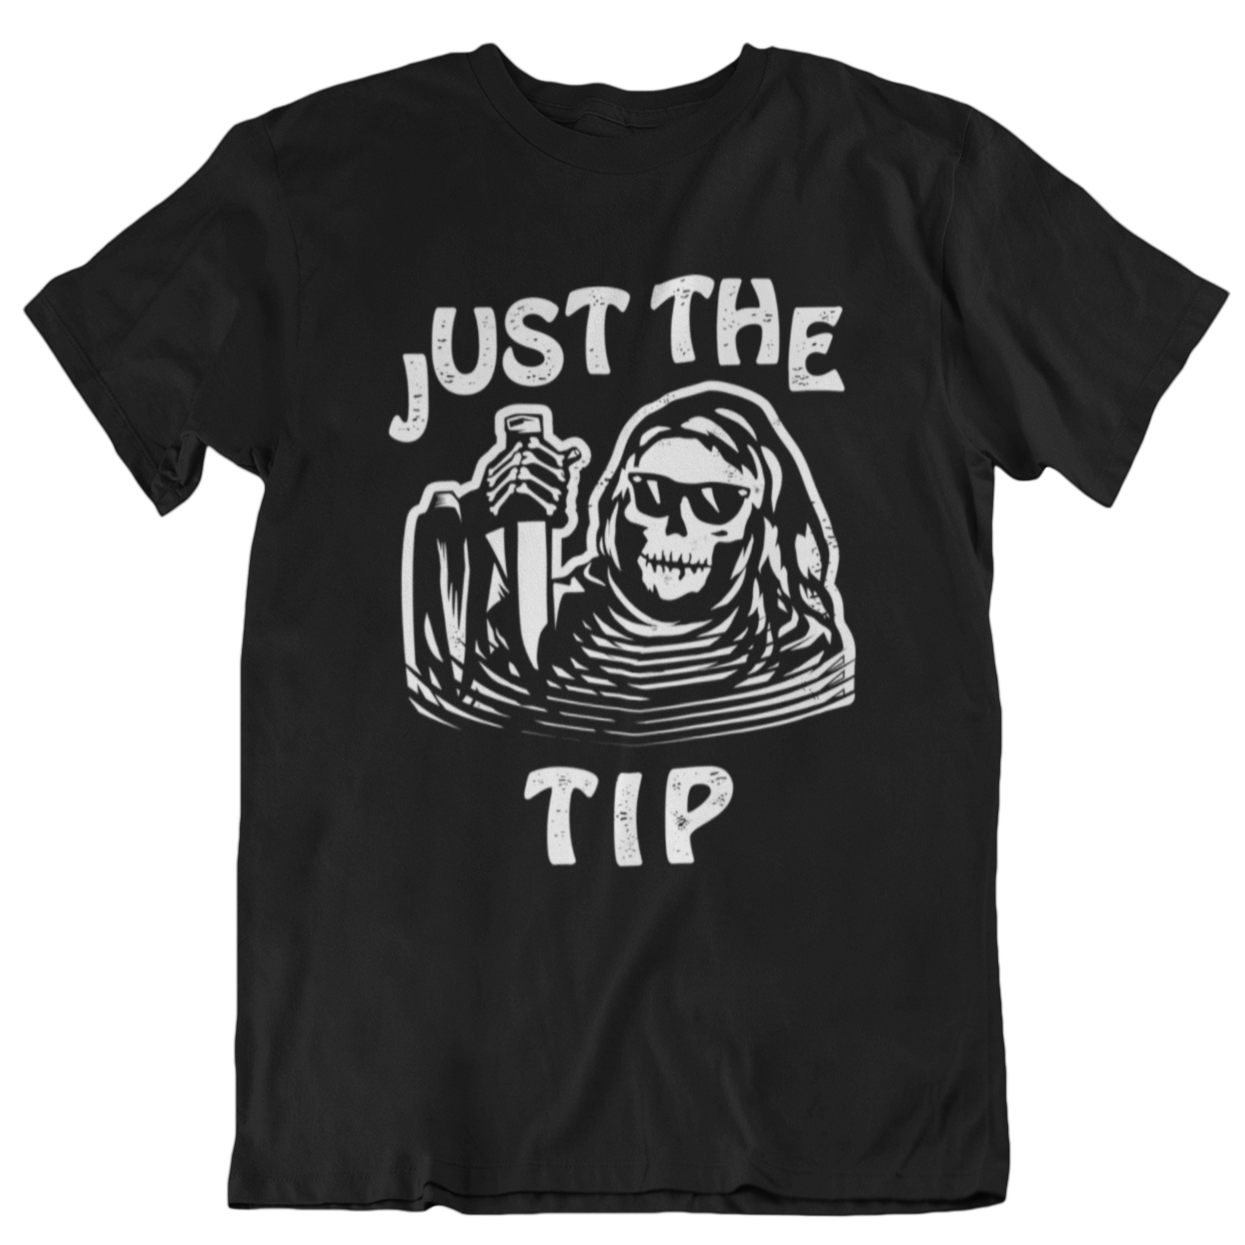 Funny black t-shirt for Latino men.  The graphic is a humorous play on words.  There is a tattoo-style skeleton holding a knife, and the words surrounding the image state "Just the Tip"